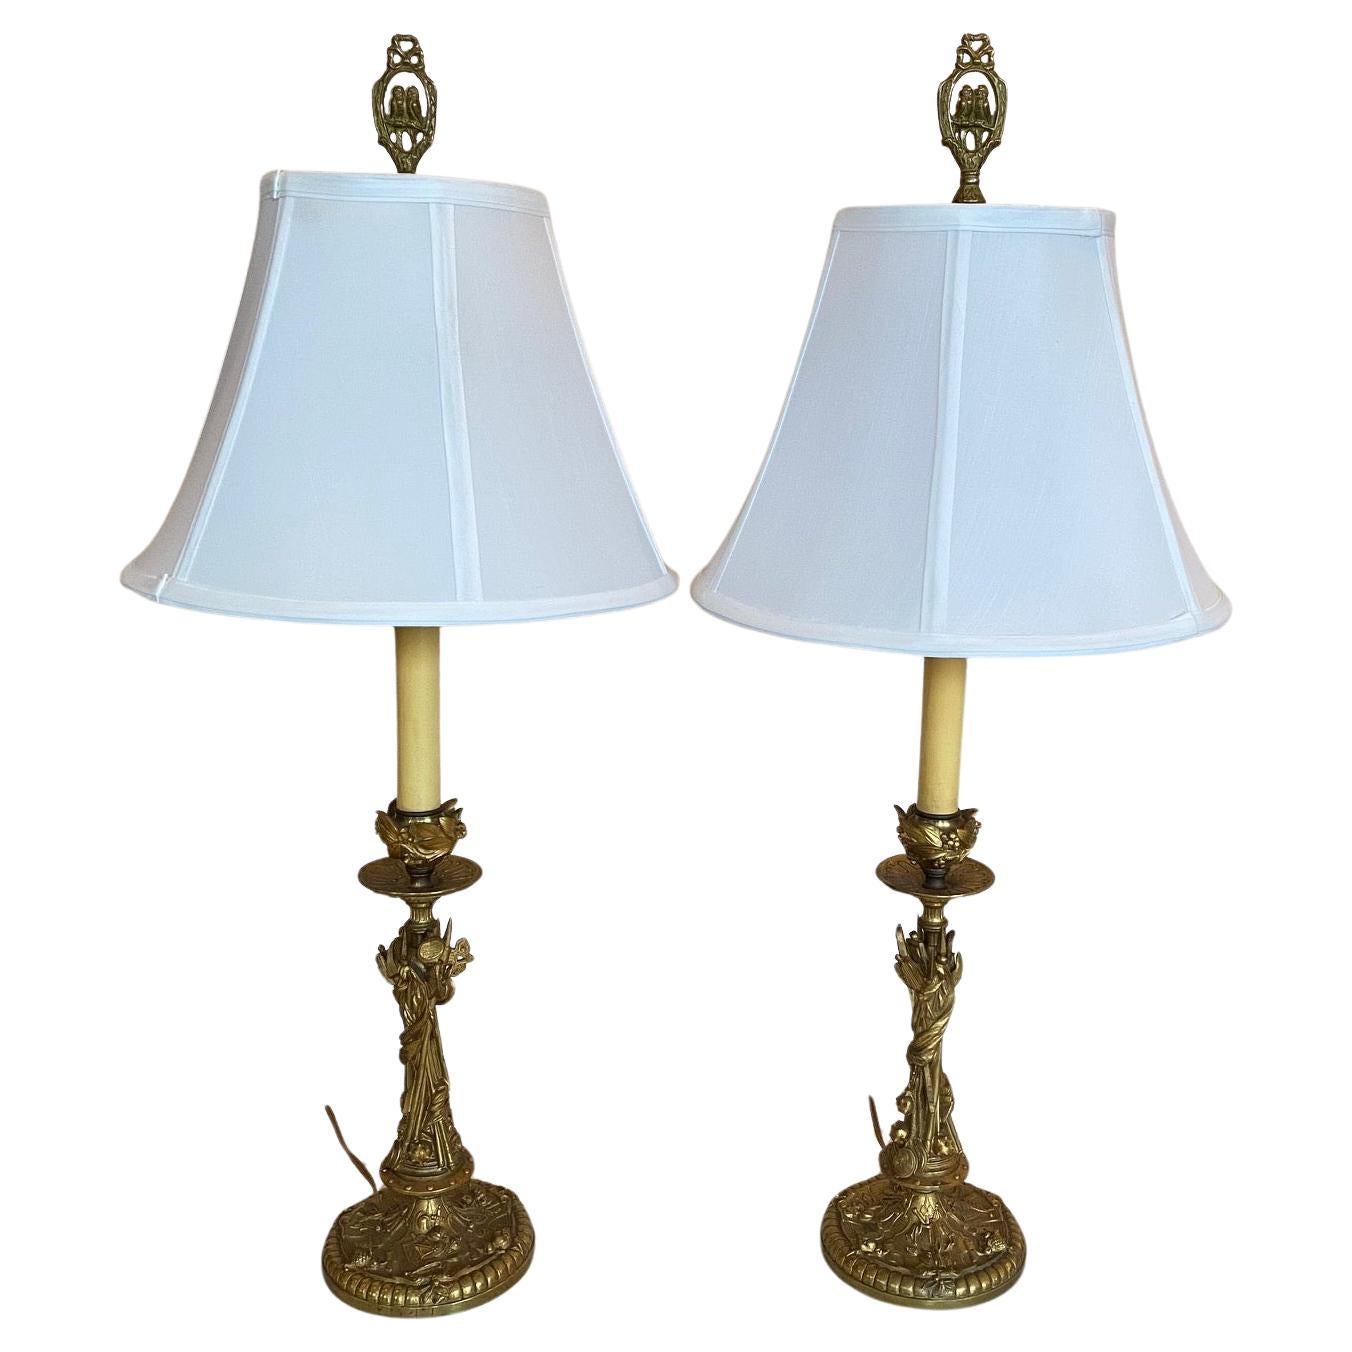 Pair of Decorative Gold Figural French Gilt Brass Table Lamps 